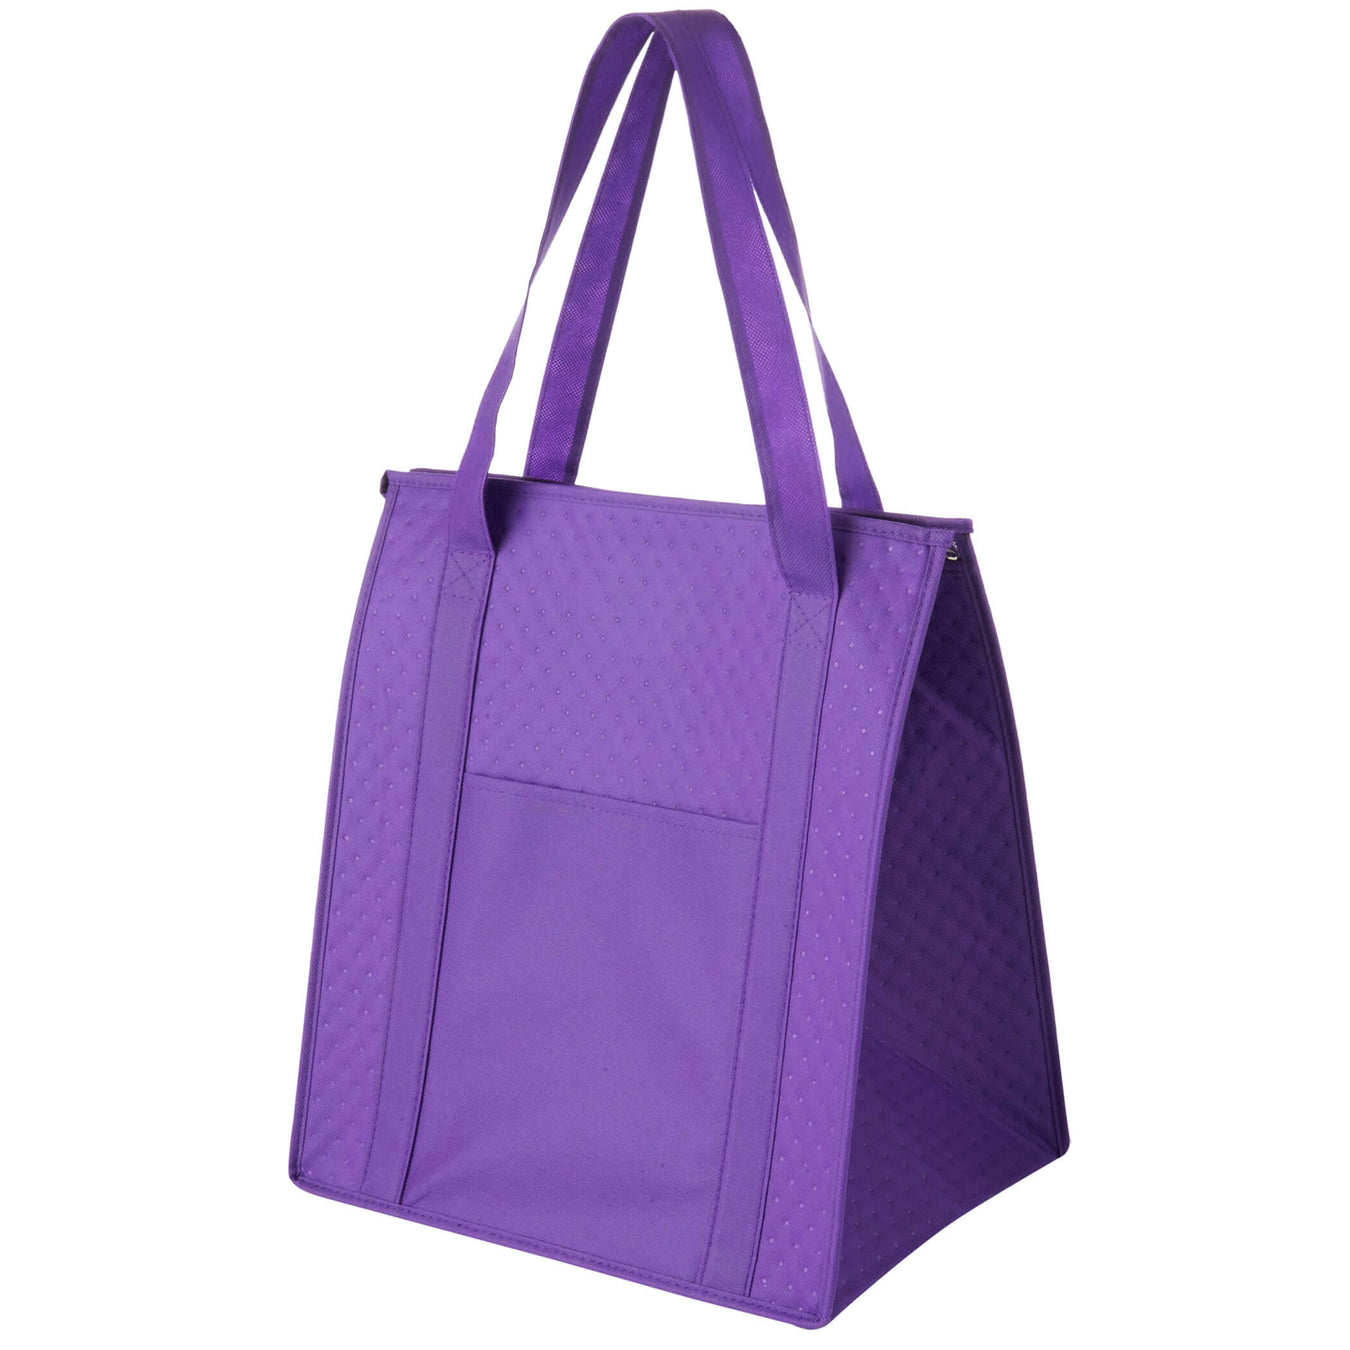 Tote Bag Mart’s High-Quality Wholesale Polyester Tote Bags